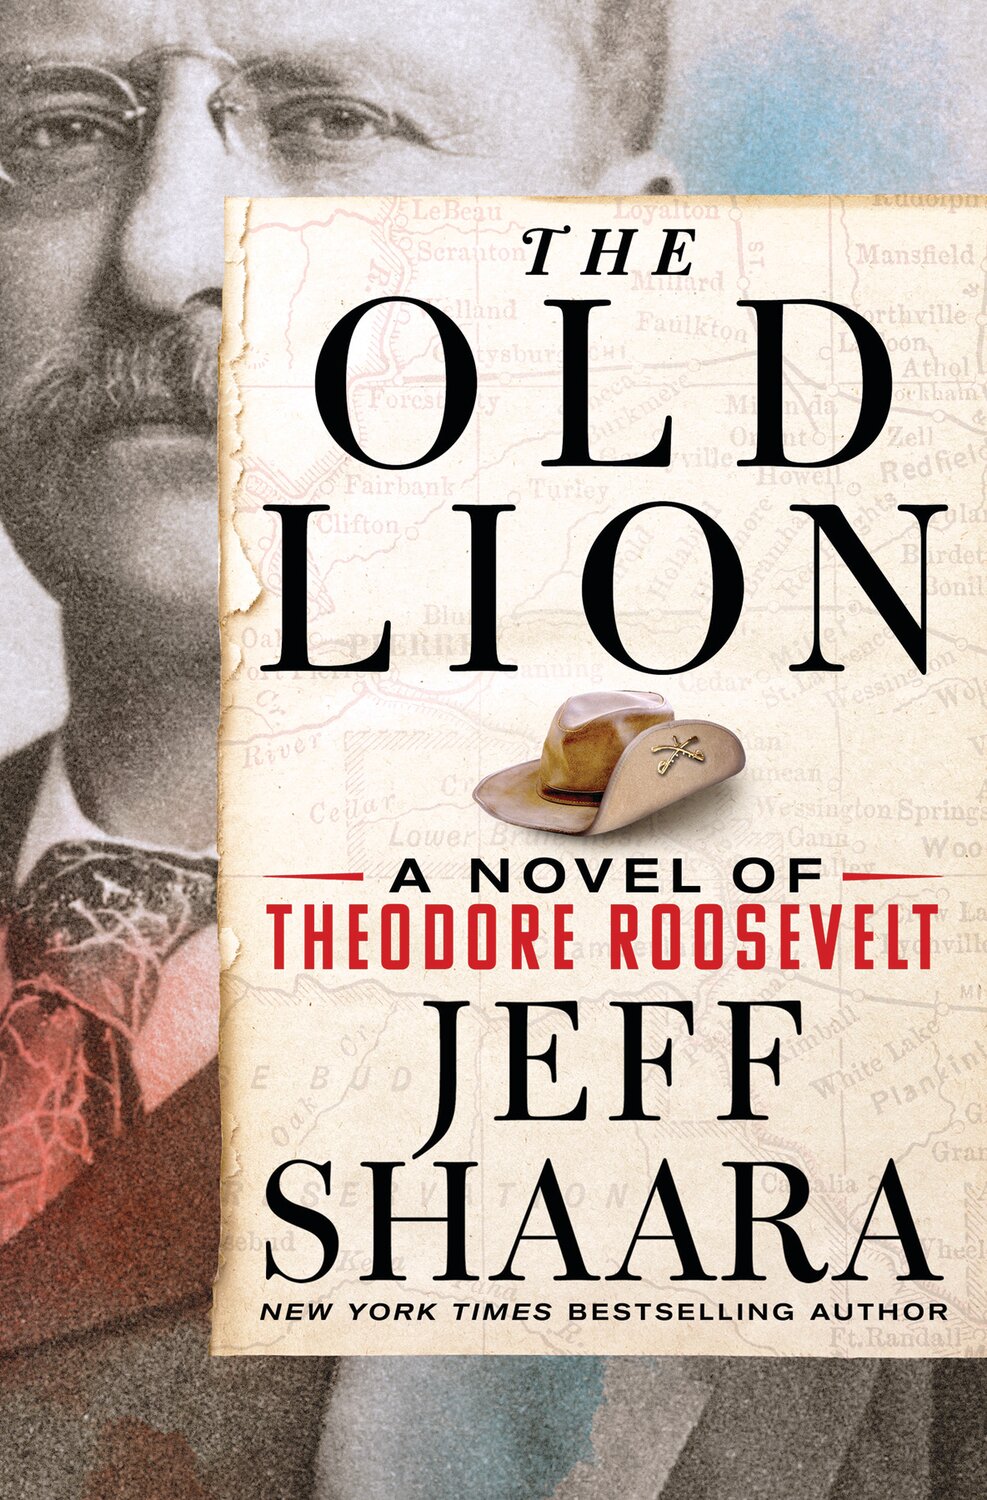 Jeff Shaara bring Theodore Roosevelt to life in his latest novel.